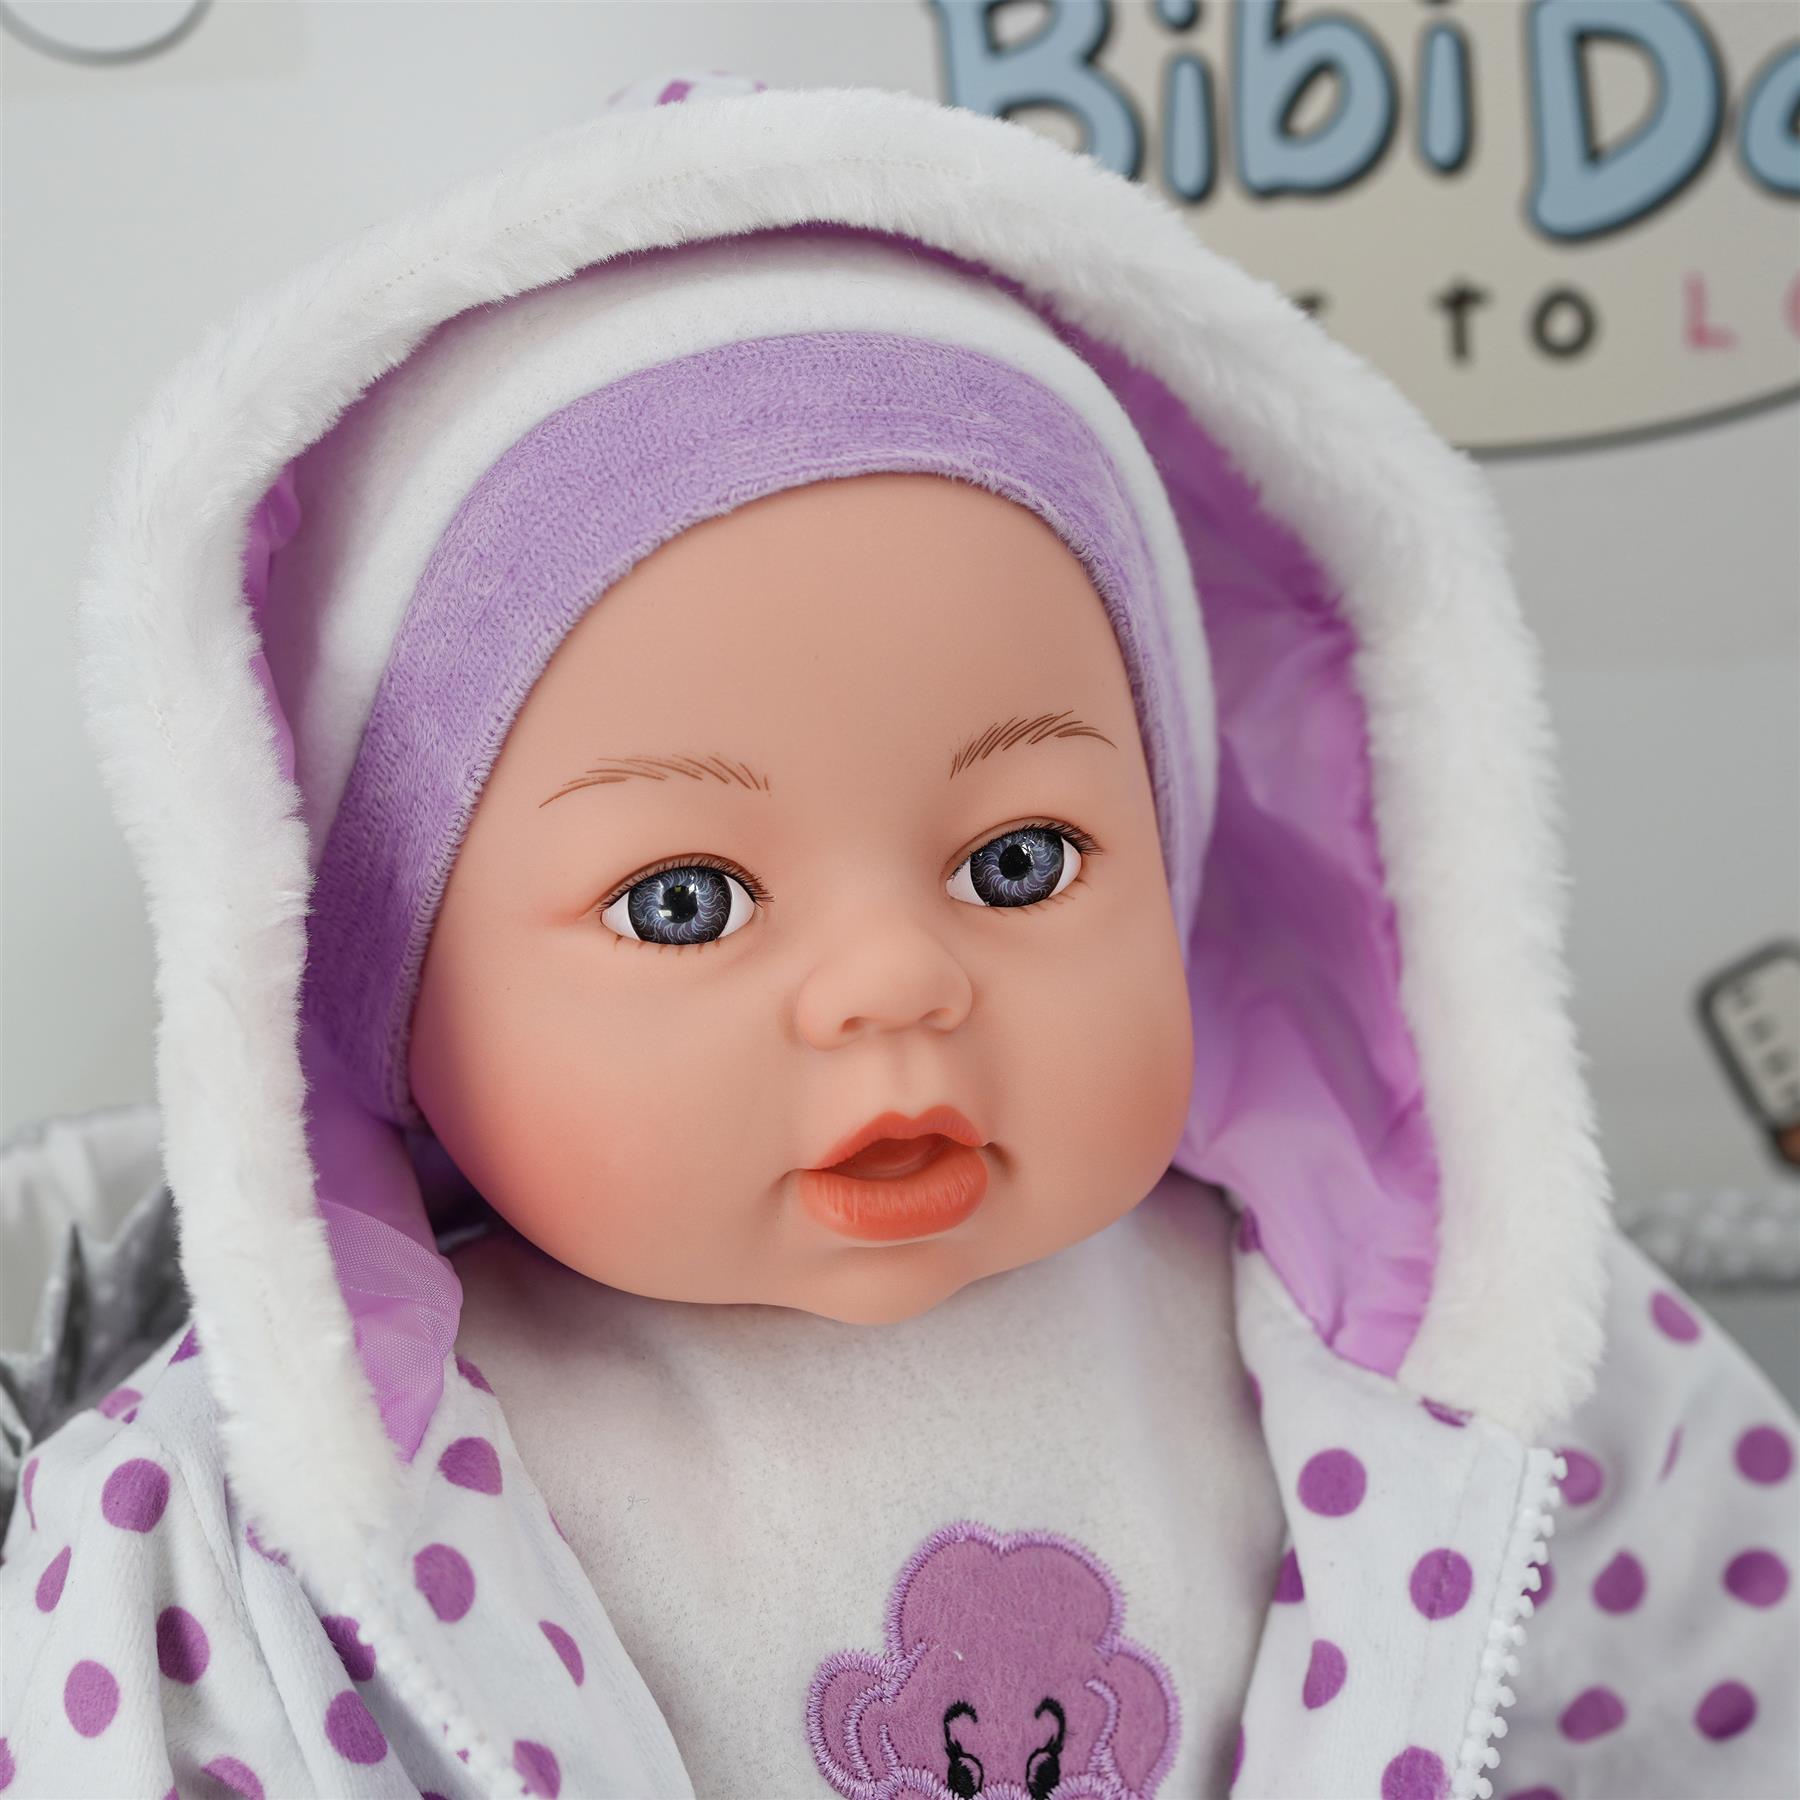 18" Baby Doll Pink and Purple Clothes Set by BiBi Doll - The Magic Toy Shop